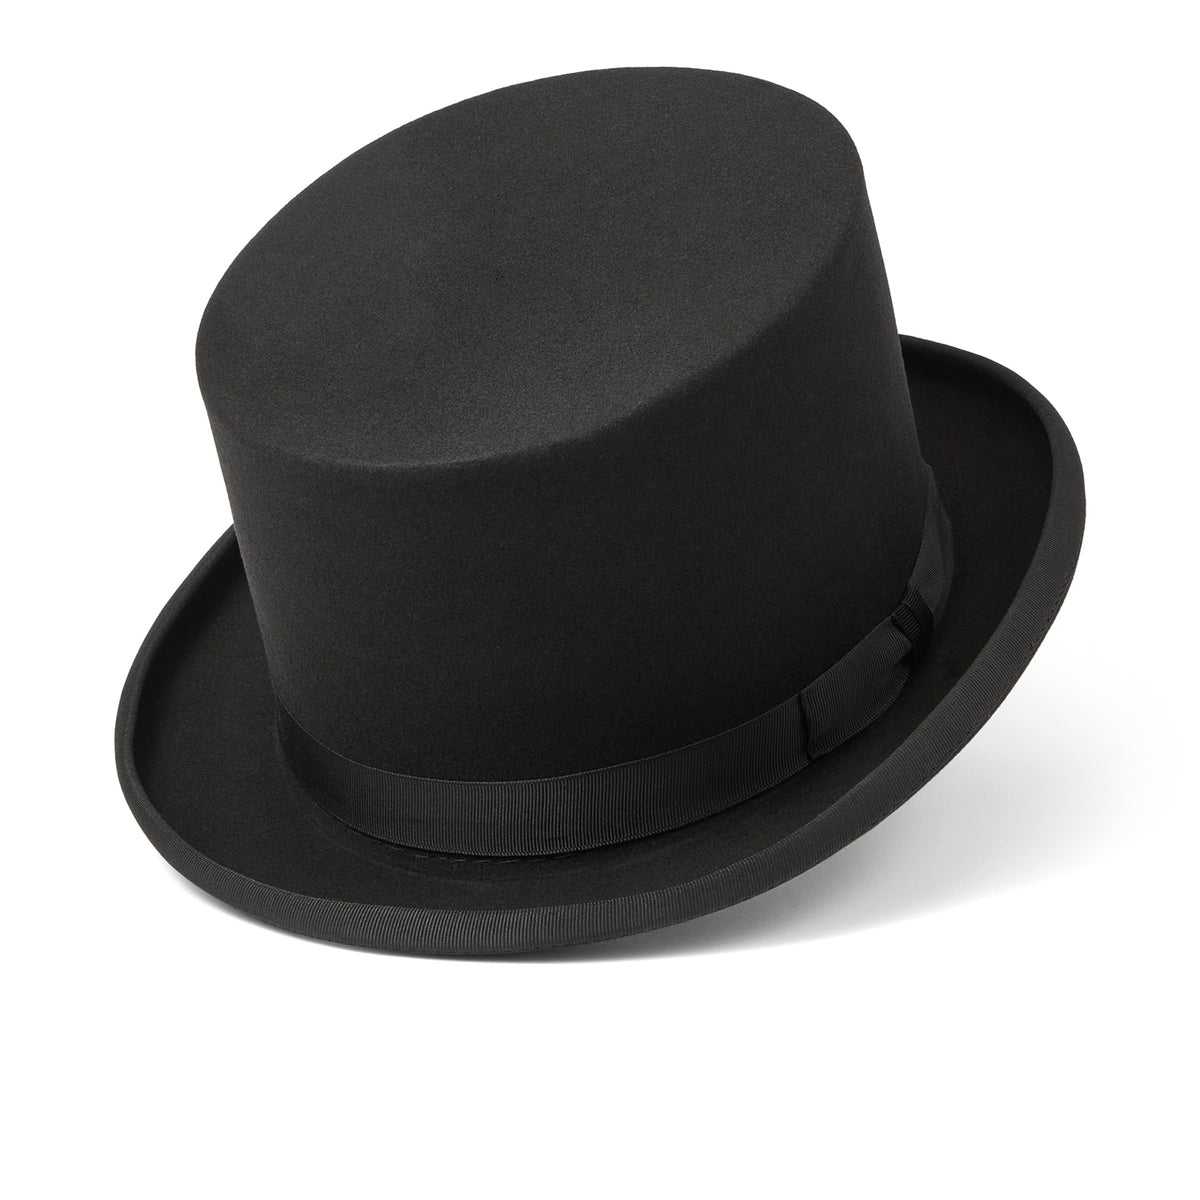 The James Bond Oddjob Bowler Hat - Goldfinger Edition - by Lock &amp; Co.